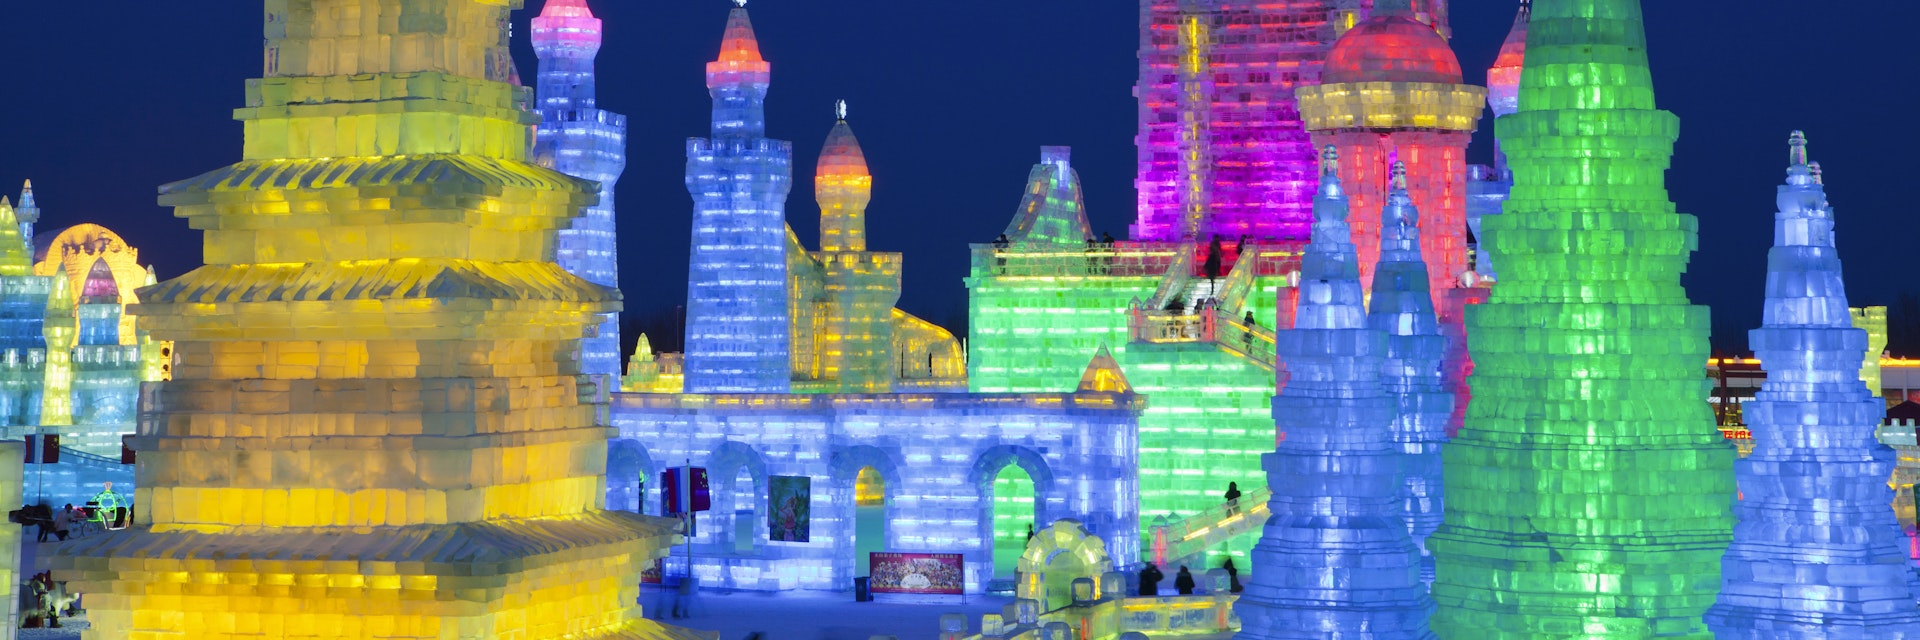 China, Heilongjiang Province, Harbin. Ice sculptures at the Harbin Ice and Snow Festival.